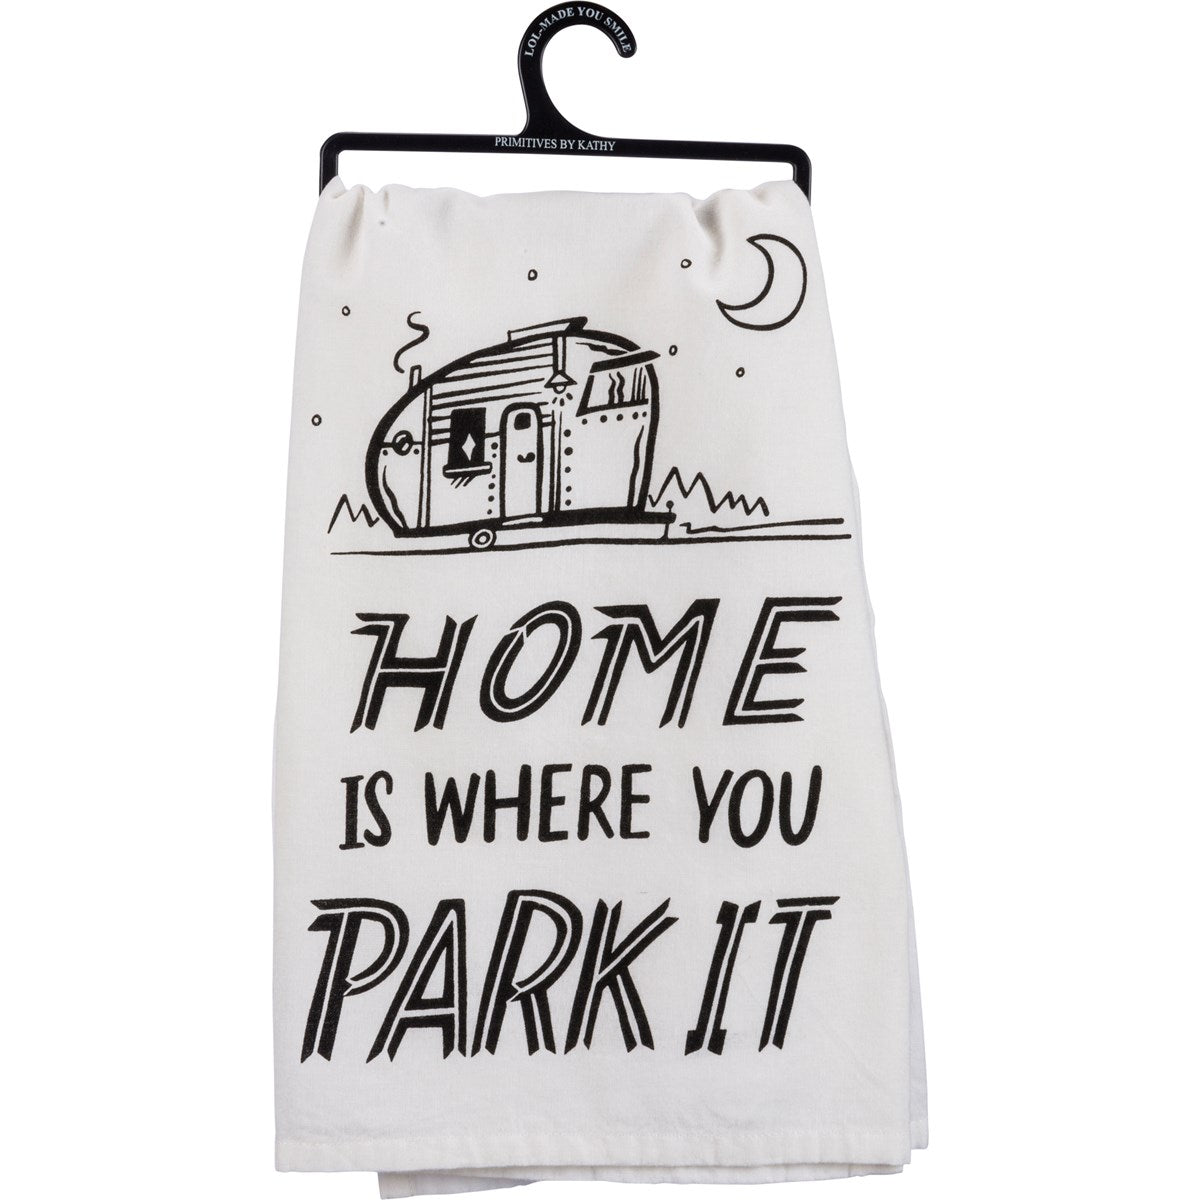 "HOME IS WHERE YOU PARK IT" DISH TOWEL